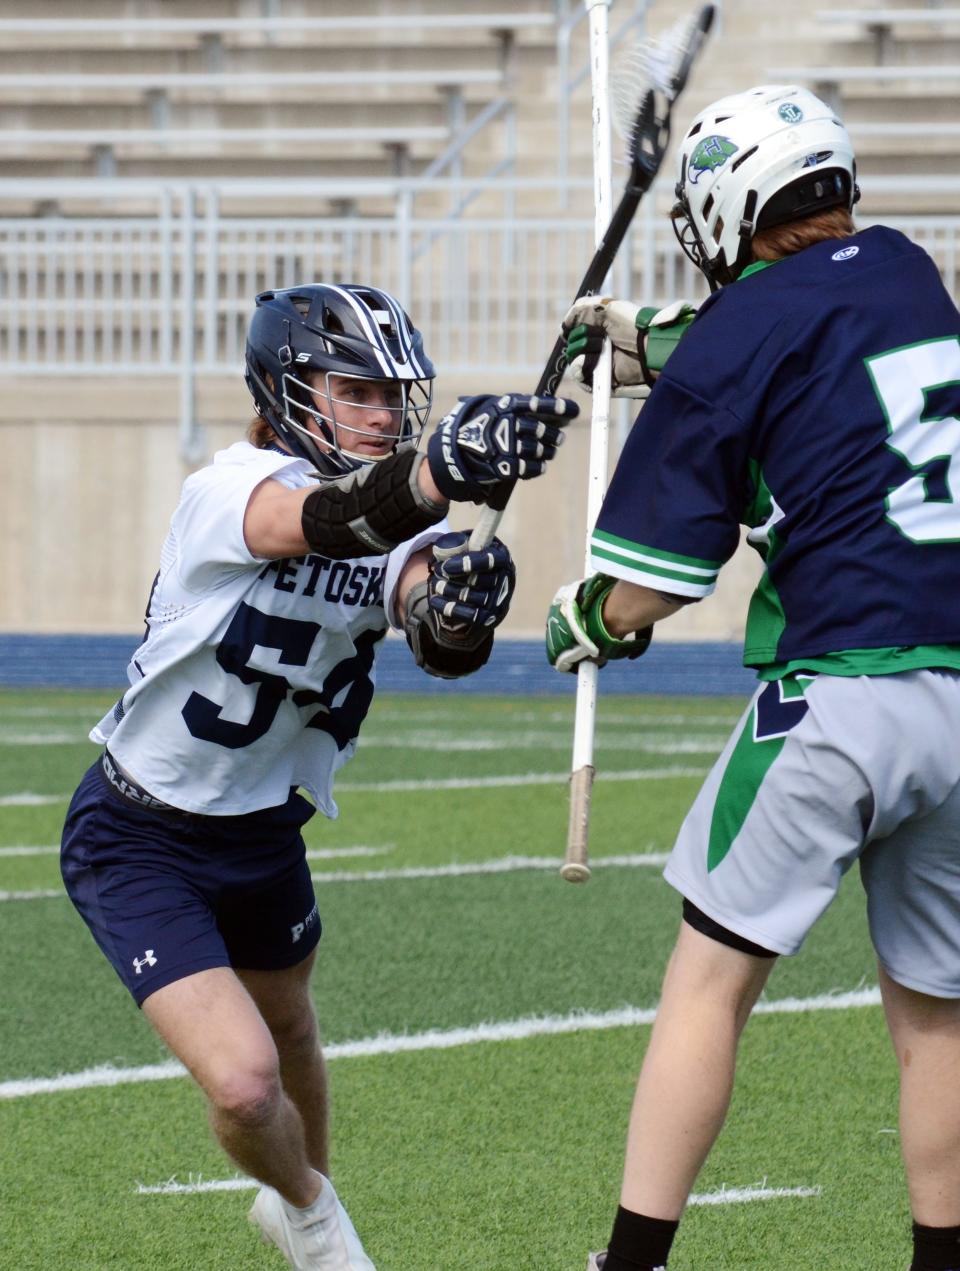 Petoskey's Caleb Gosciak defends against a Saginaw Heritage player trying to make a pass.